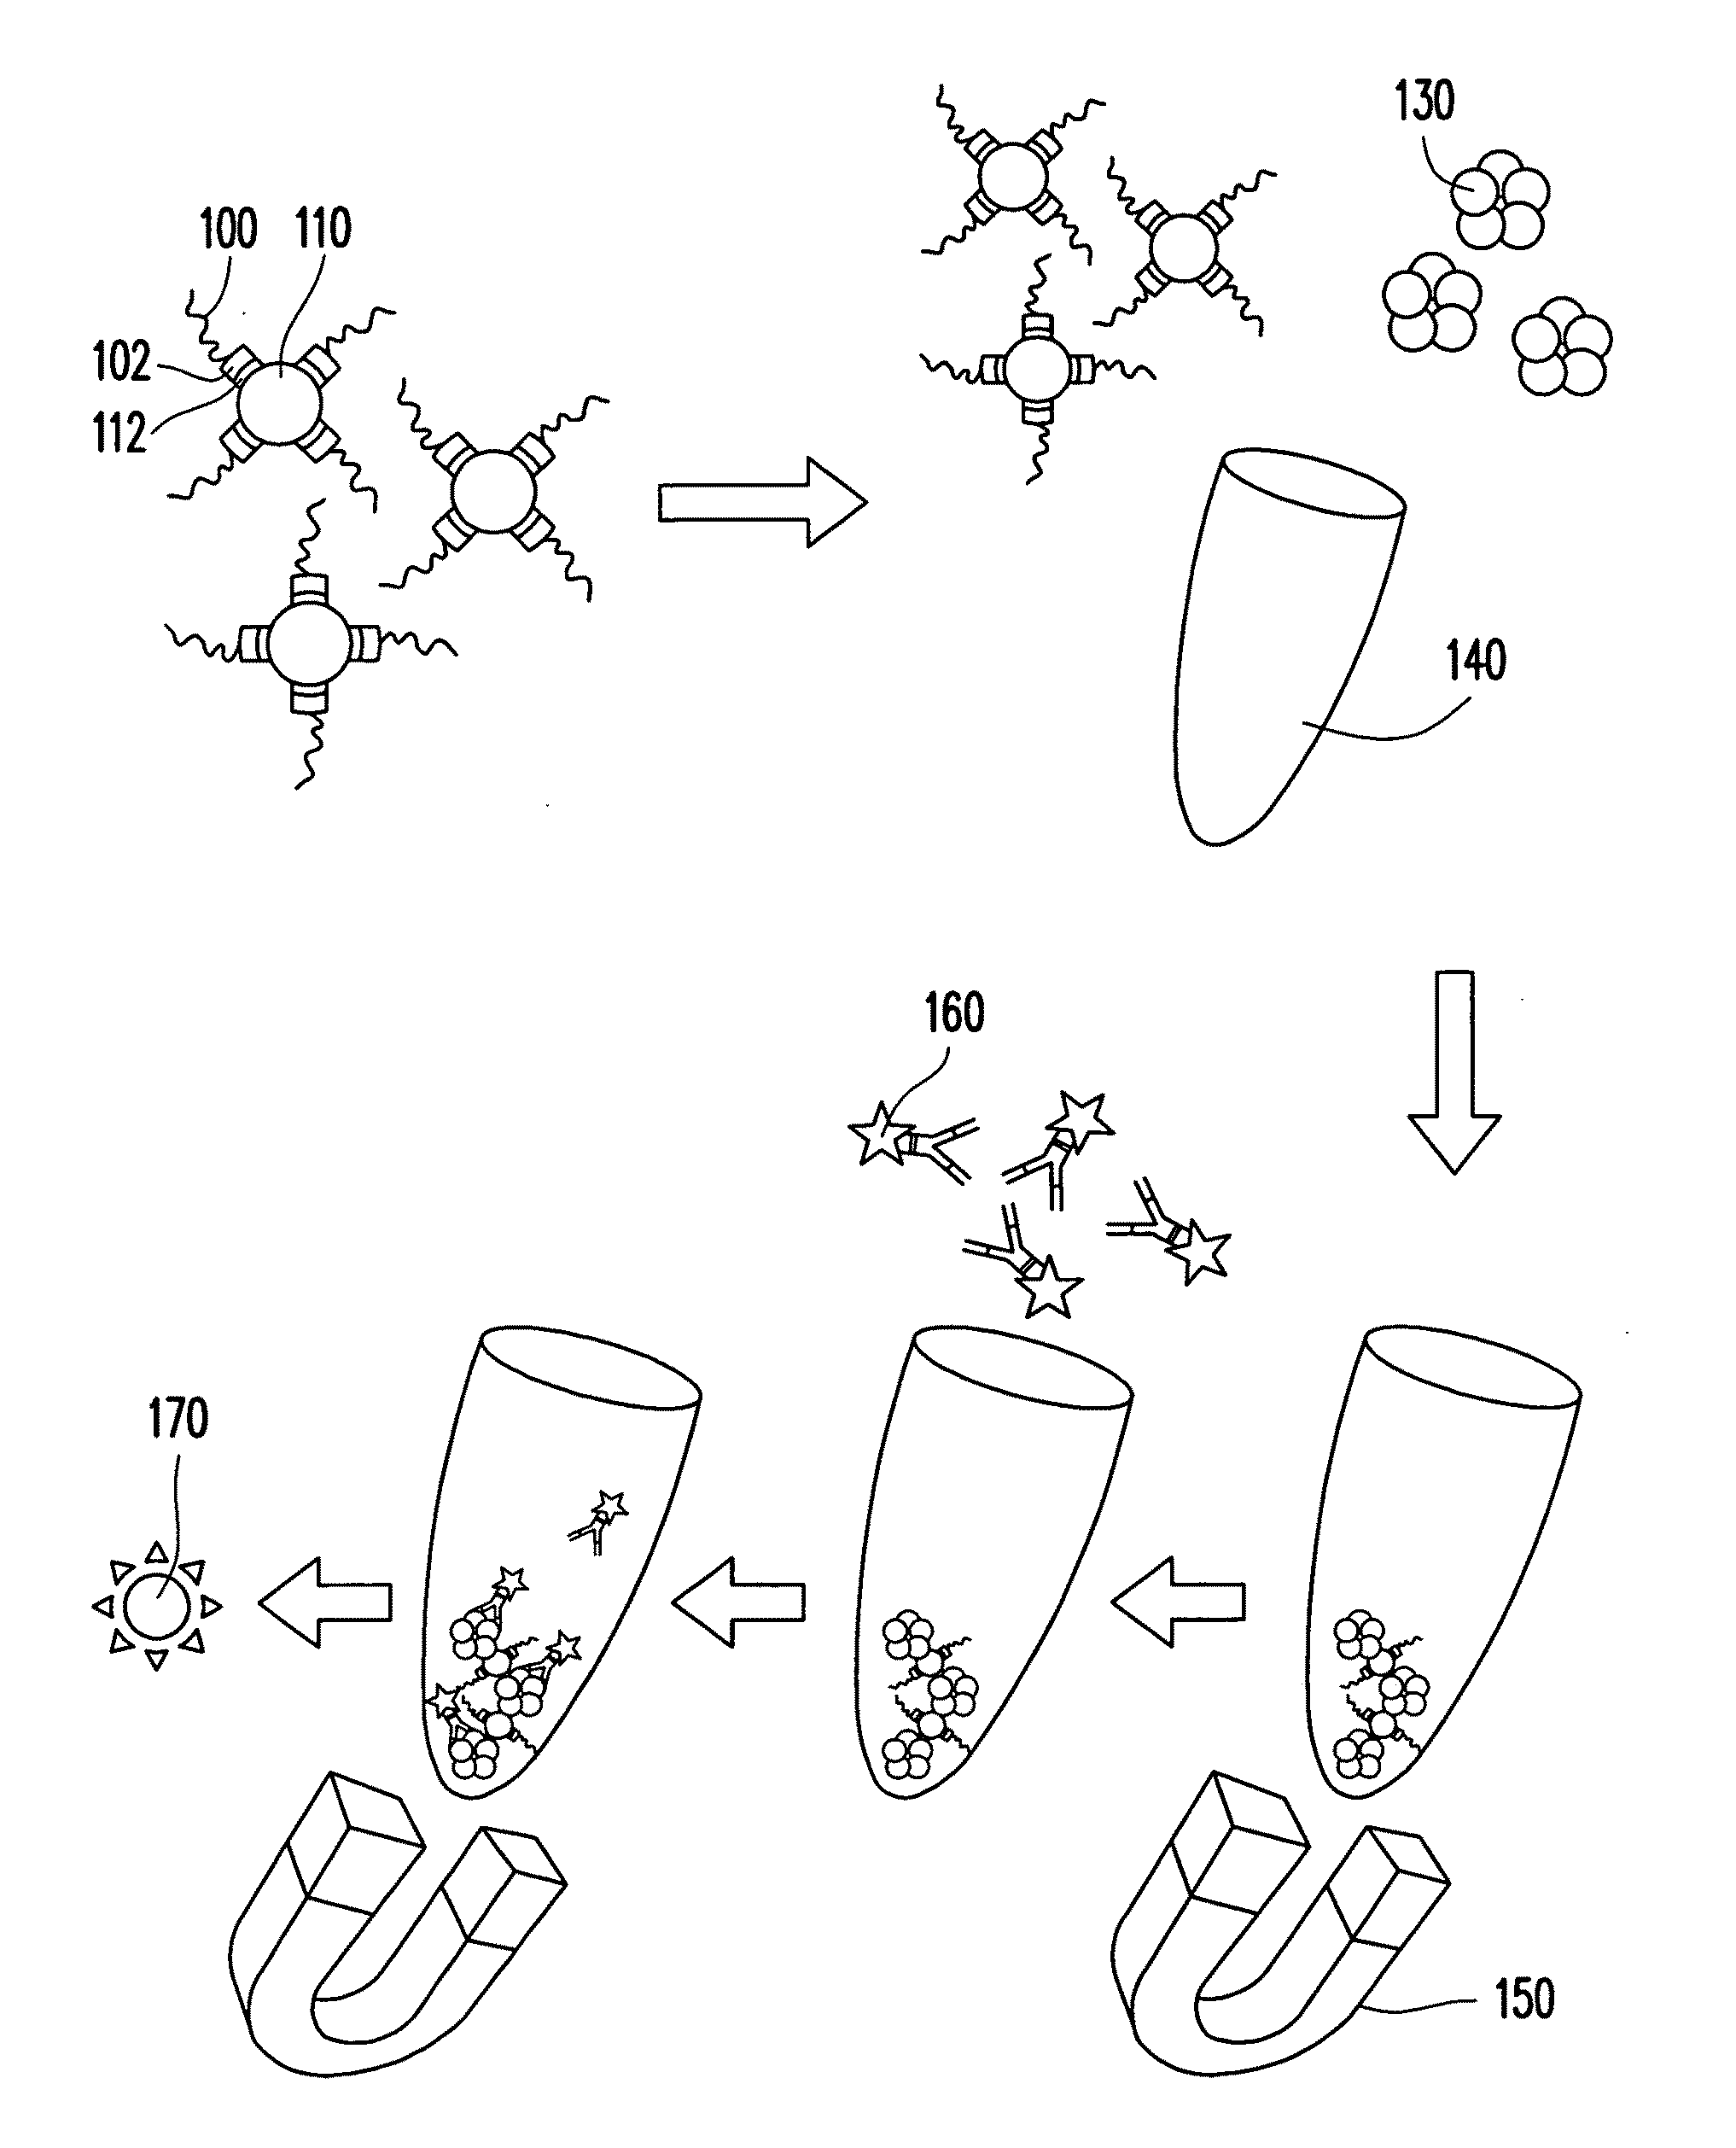 Aptamer and detection method for C-reactive protein